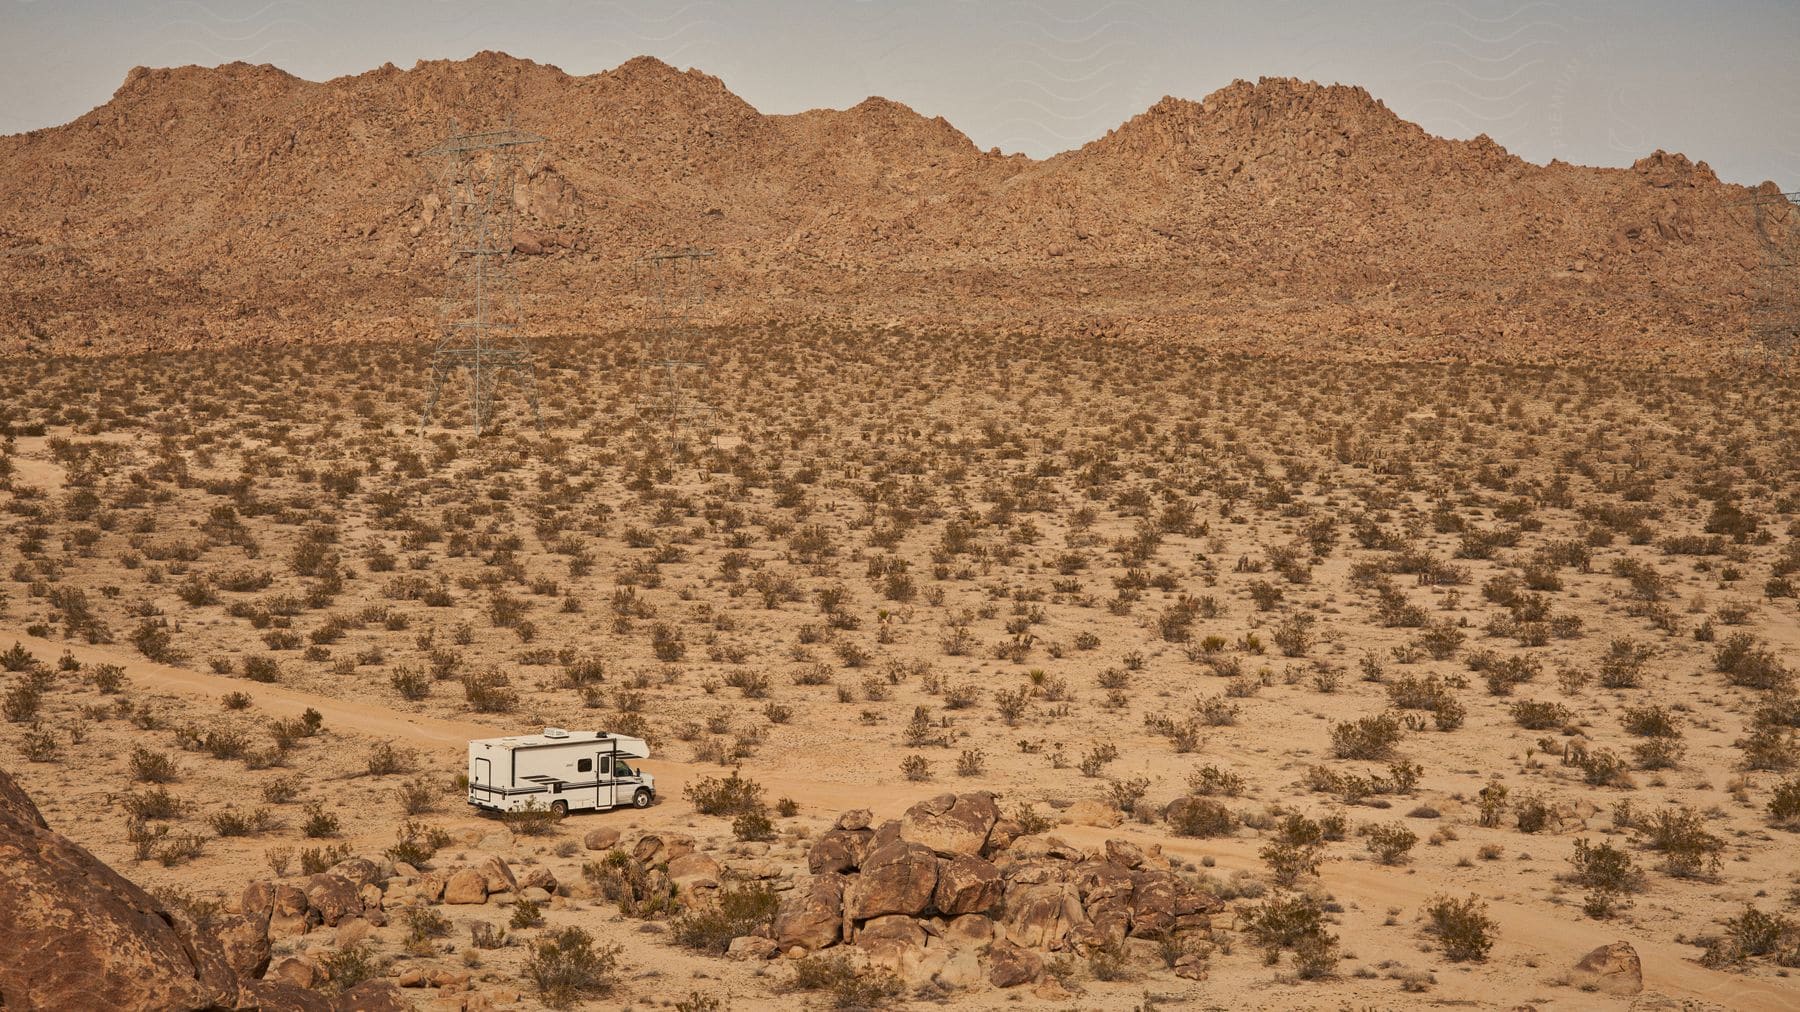 Panorama of a motorhome in the midst of a desert-like terrain with sparse vegetation and rocky mountains in the background.